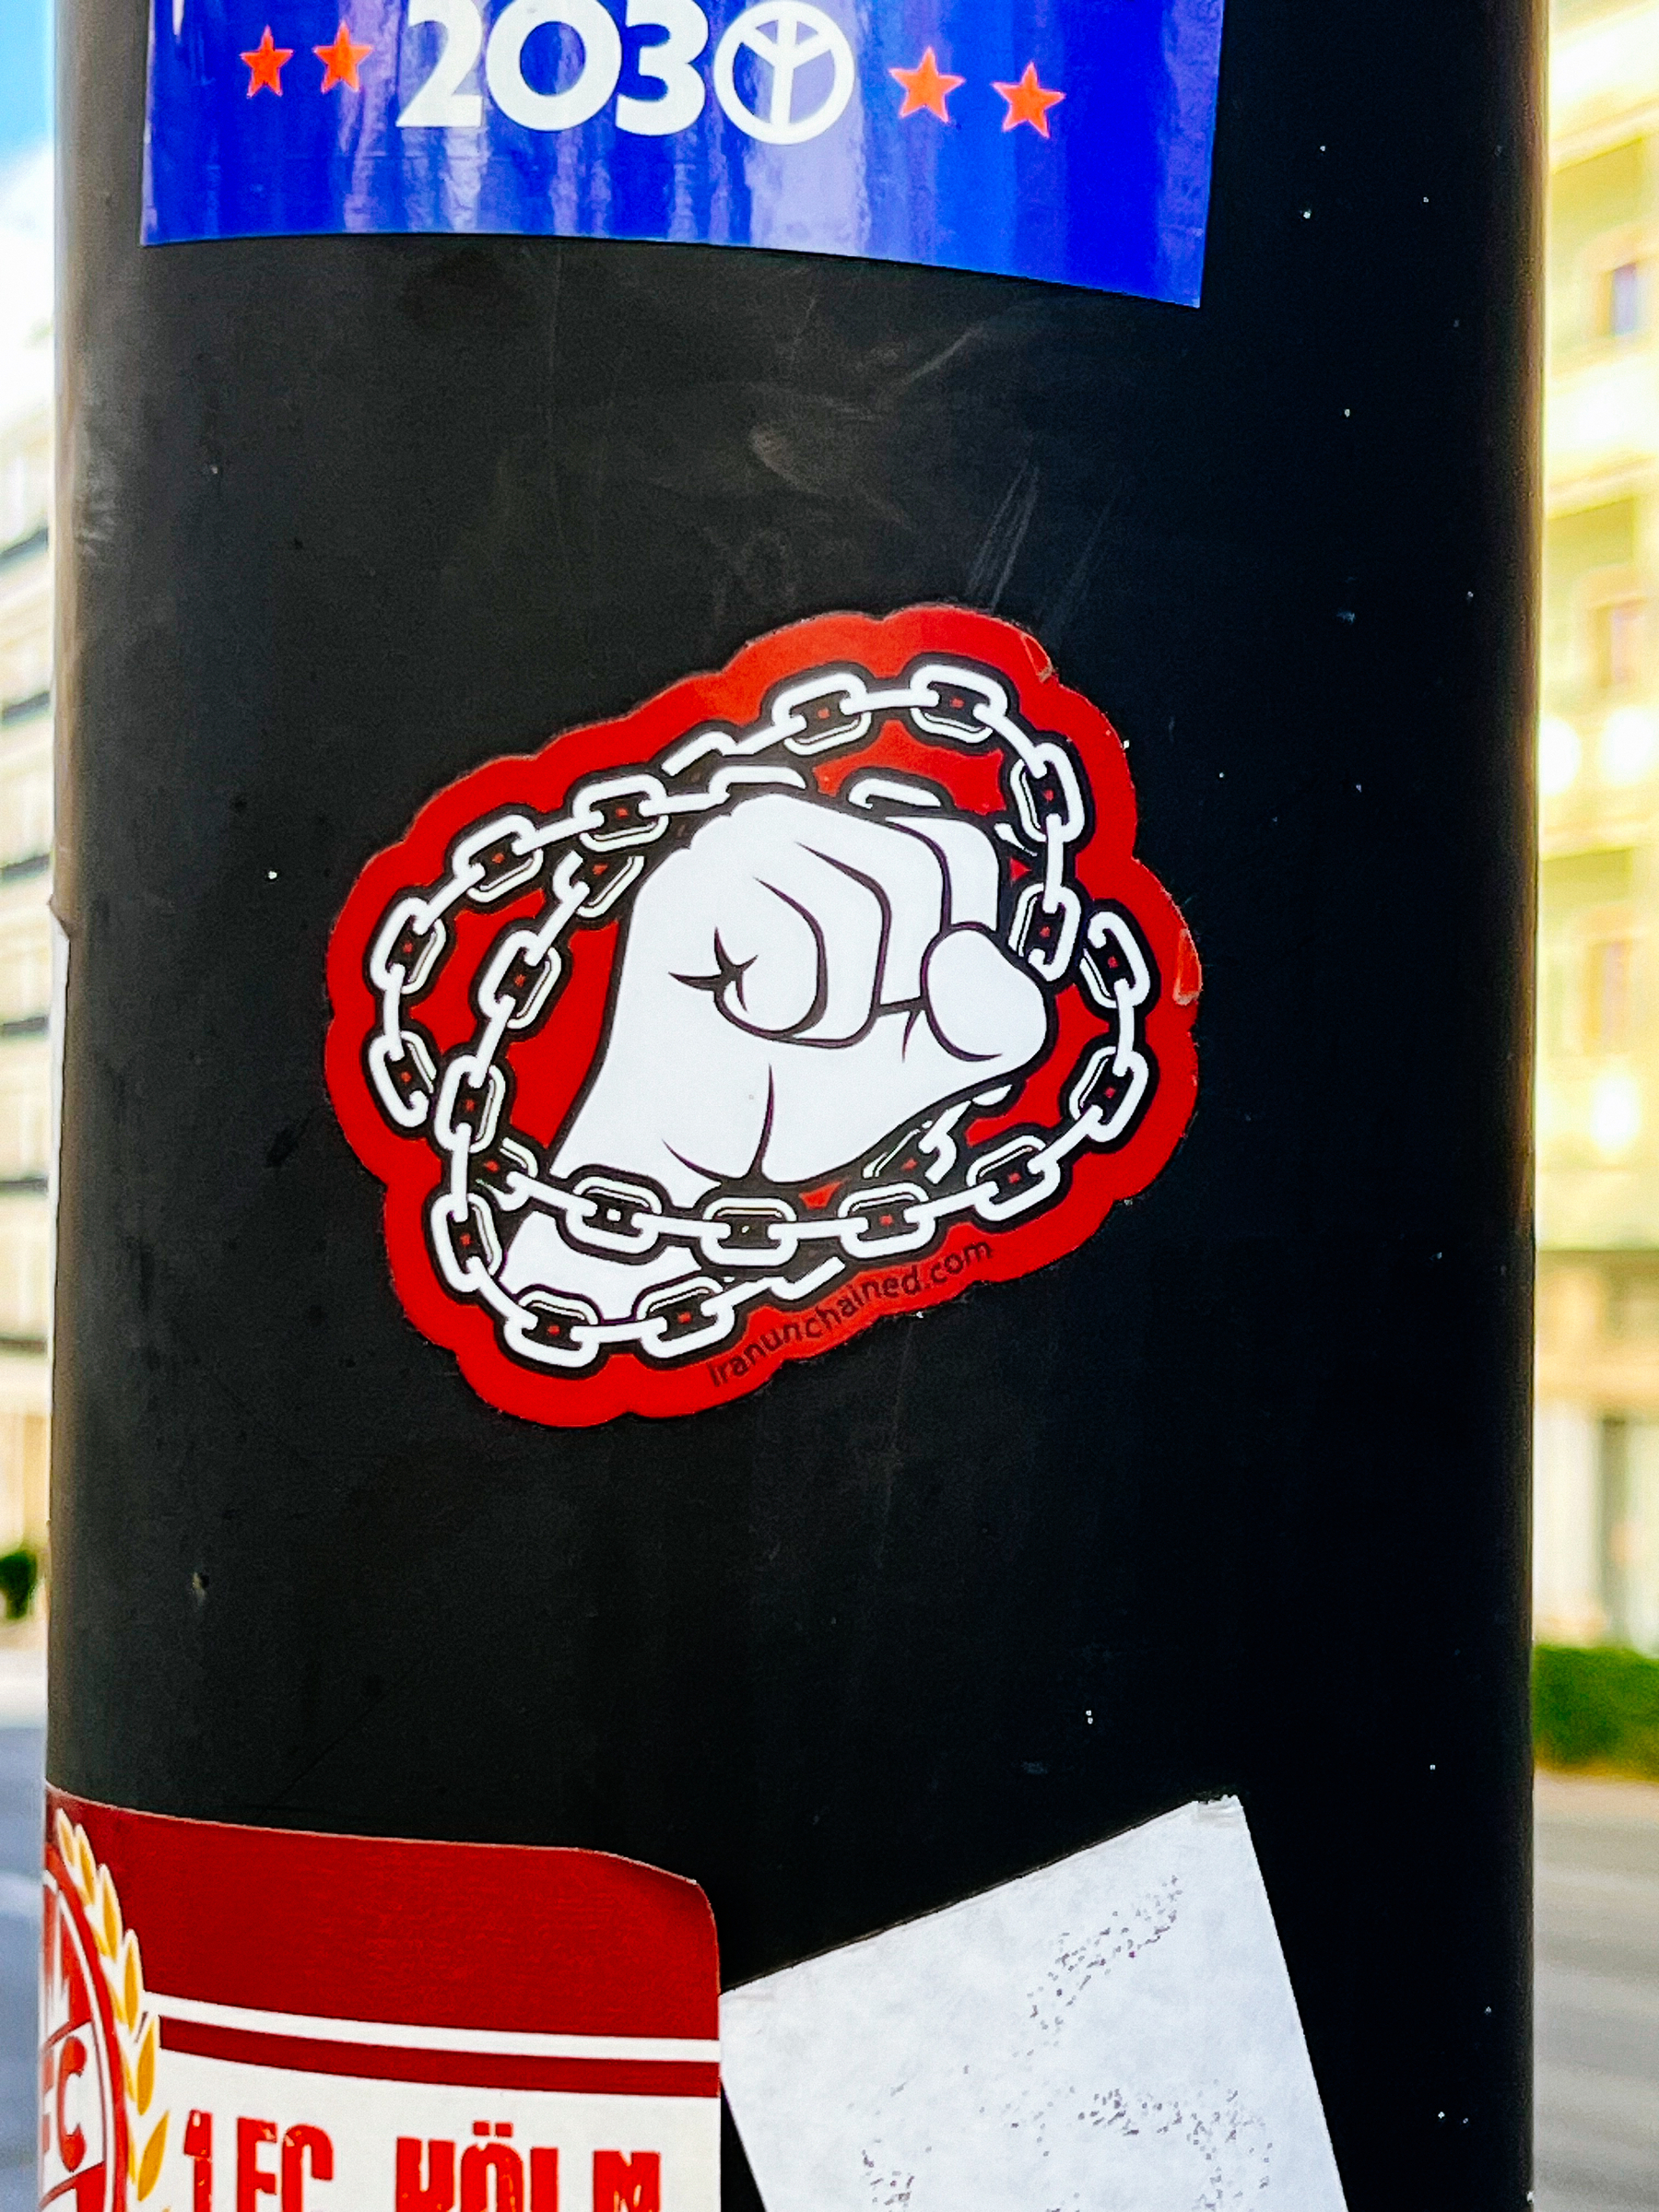 A sticker. A hand making a fist, surrounded by chains.